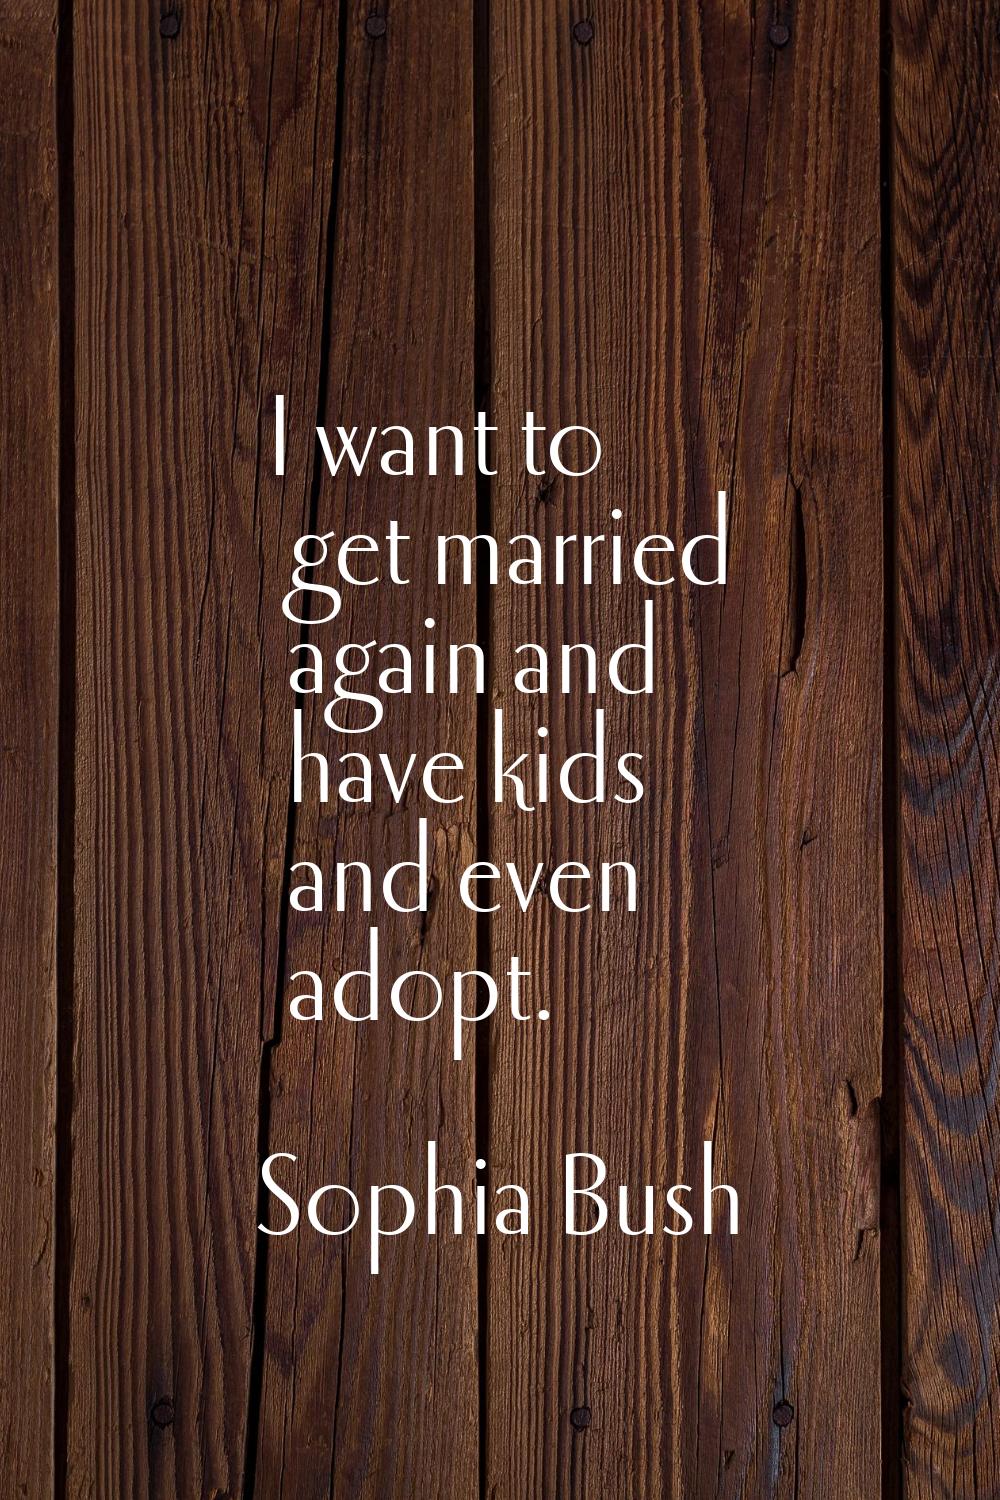 I want to get married again and have kids and even adopt.